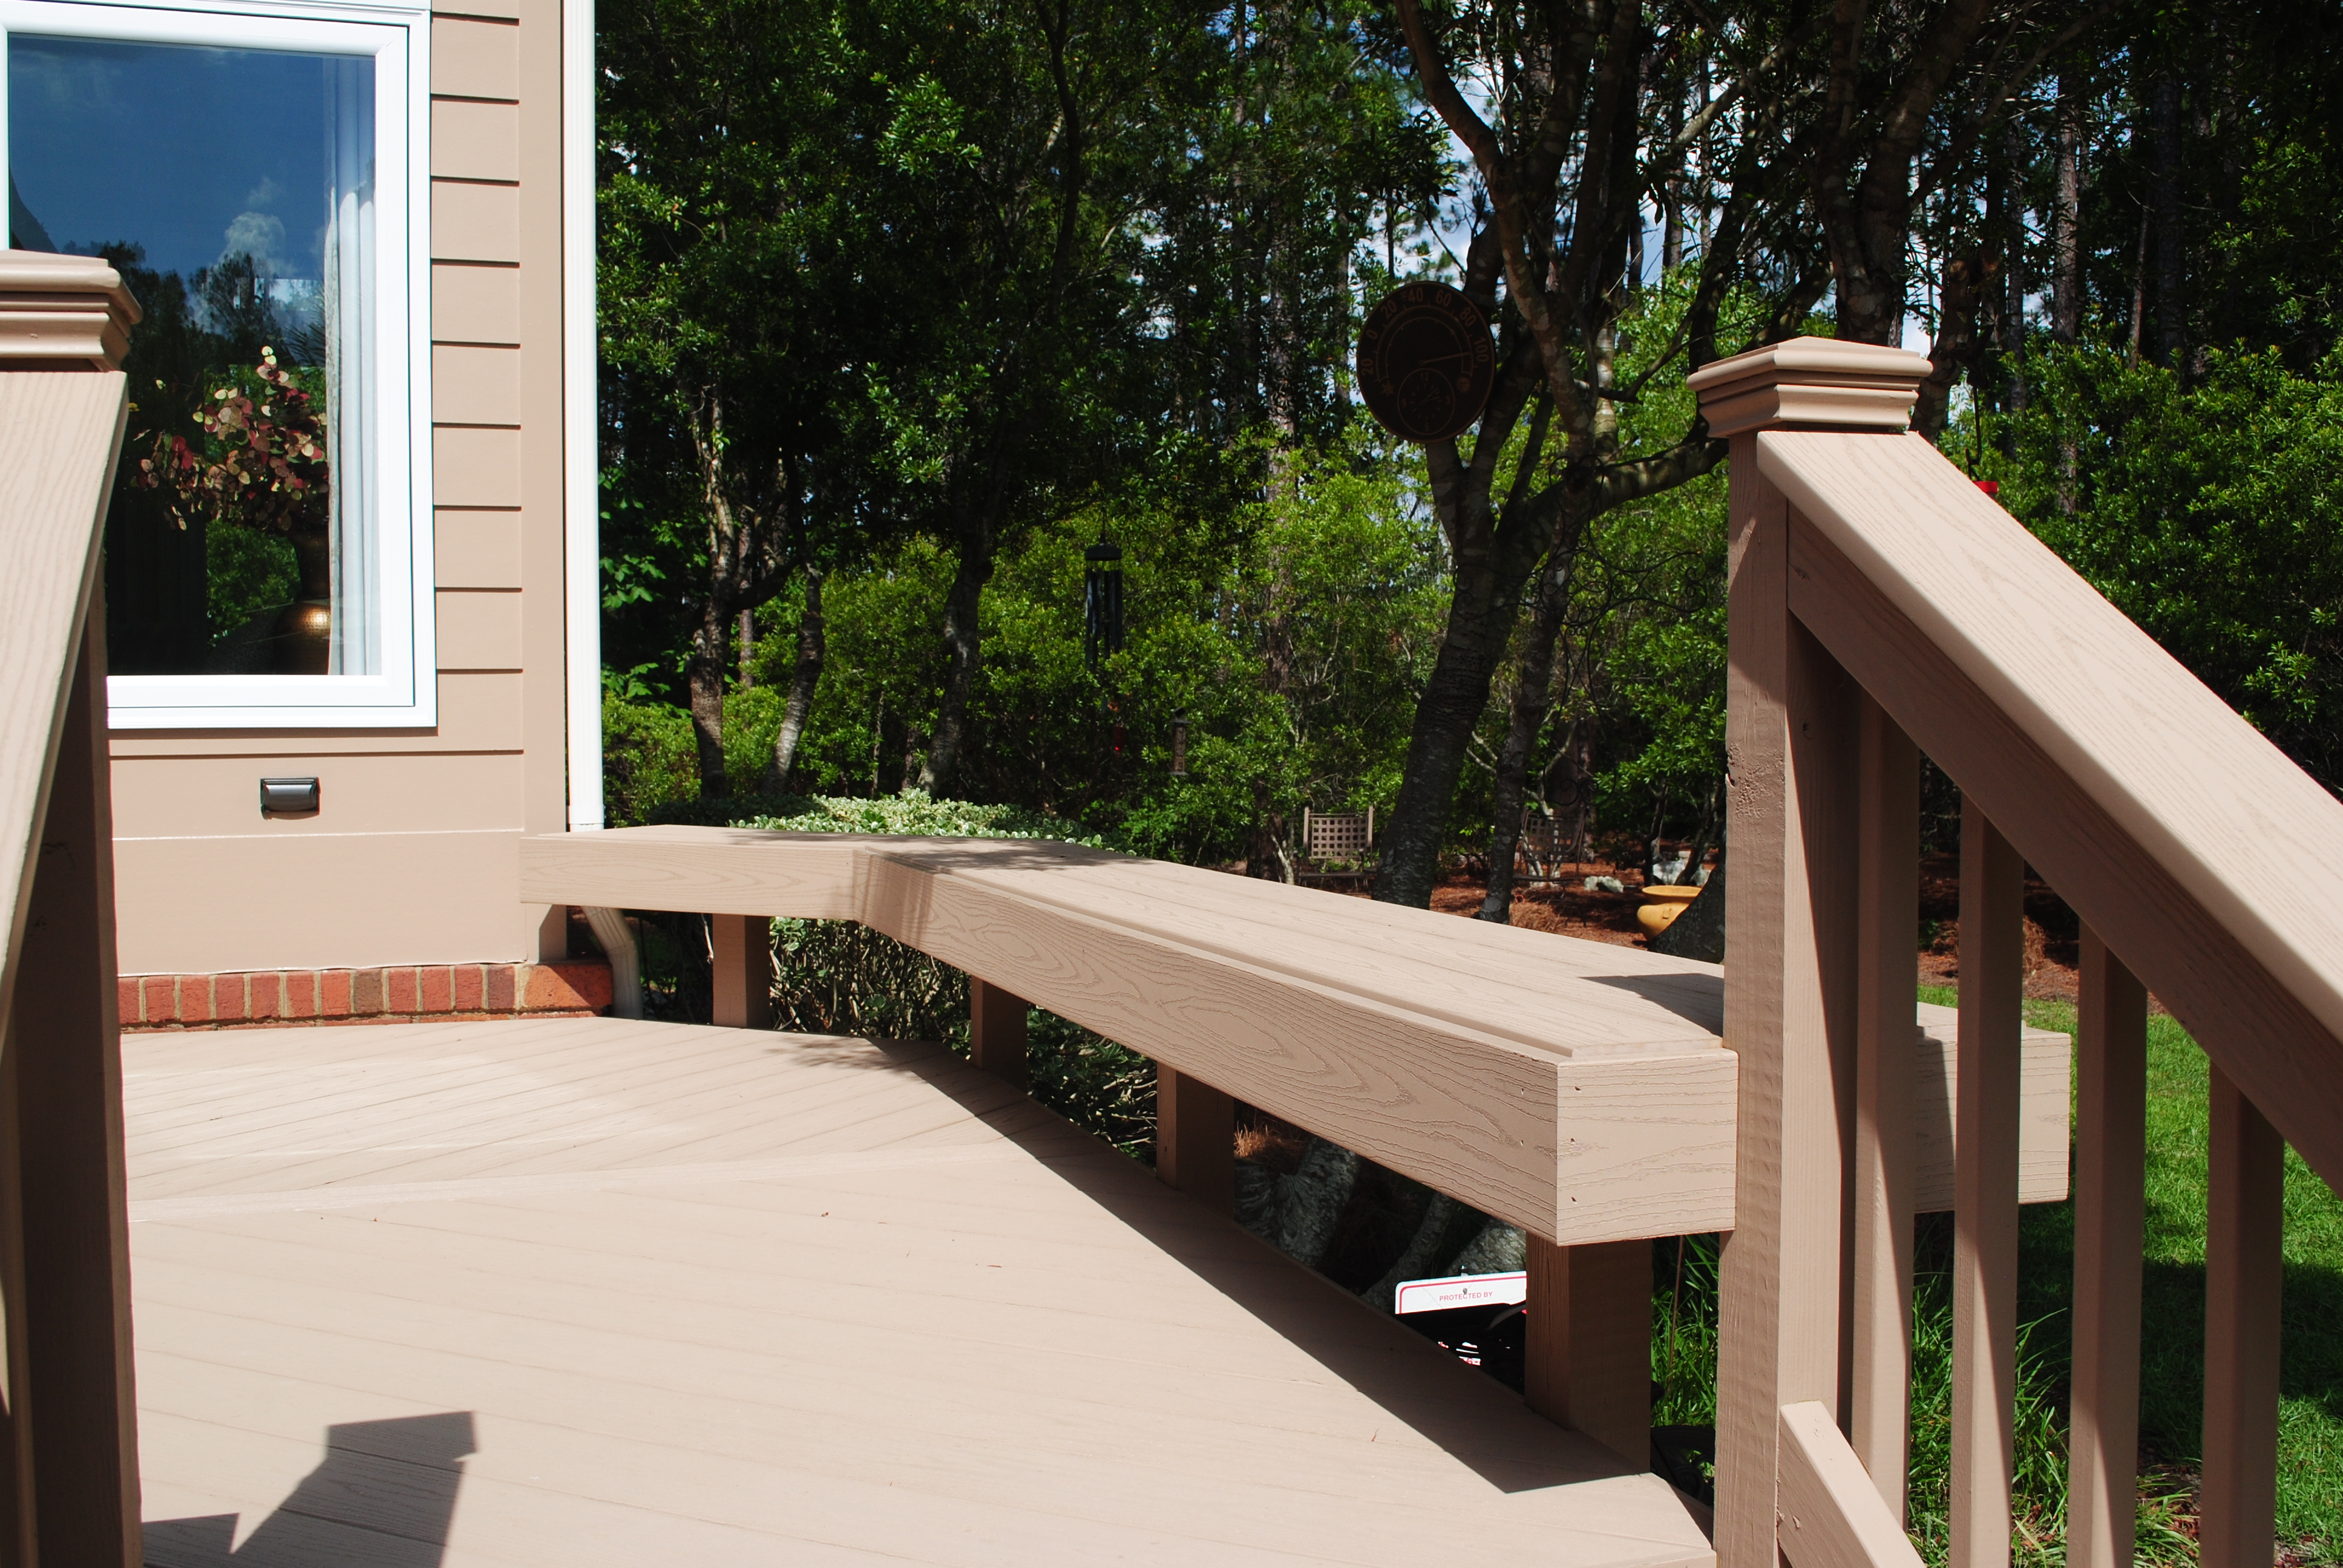 Customized Product Custom Decks Porches Patios Sunrooms And More